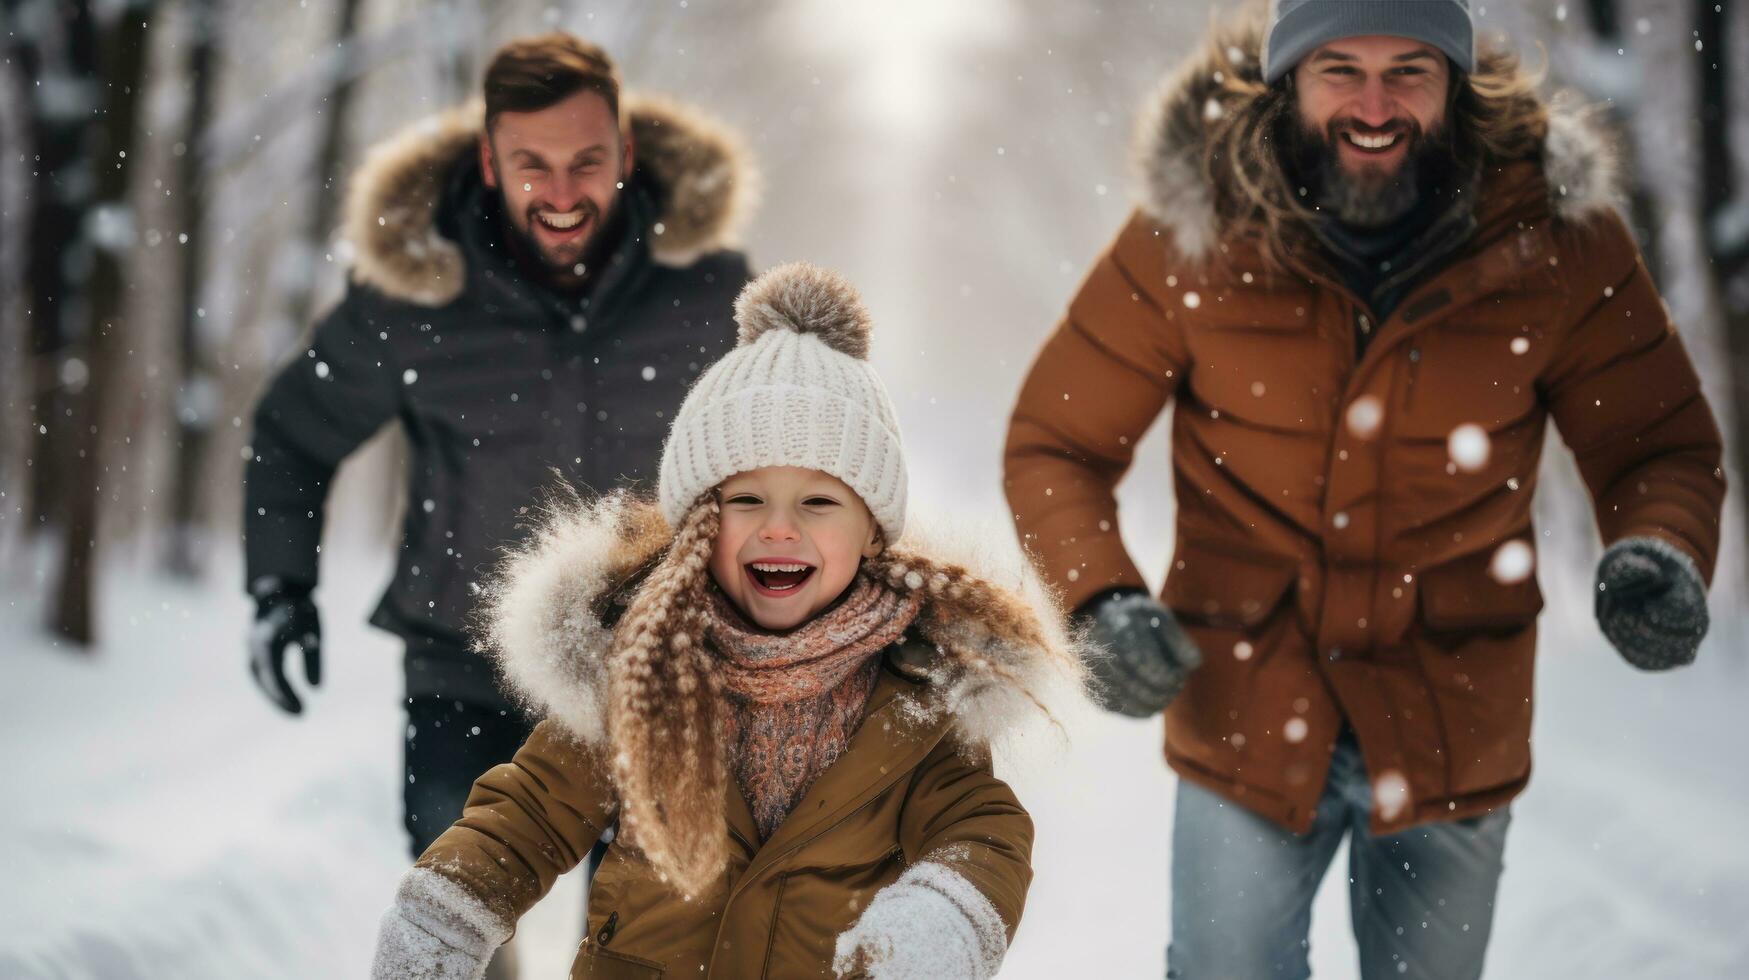 Loving family playing in the snow and making memories photo